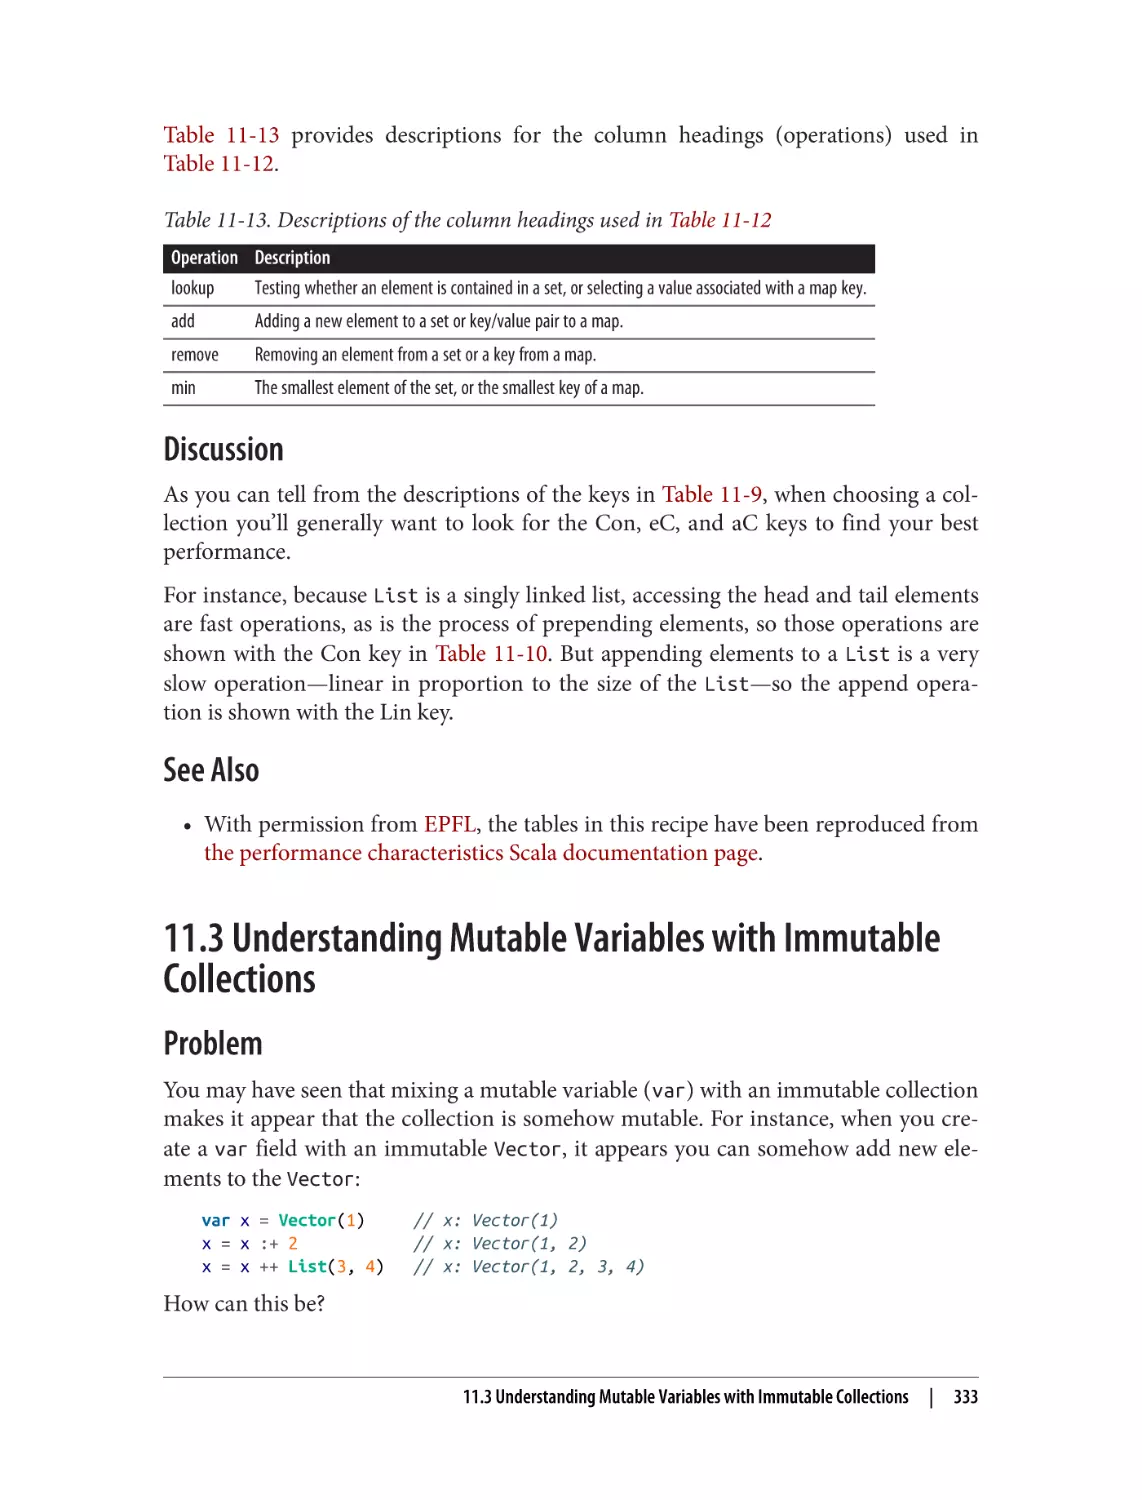 Discussion
See Also
11.3 Understanding Mutable Variables with Immutable Collections
Problem